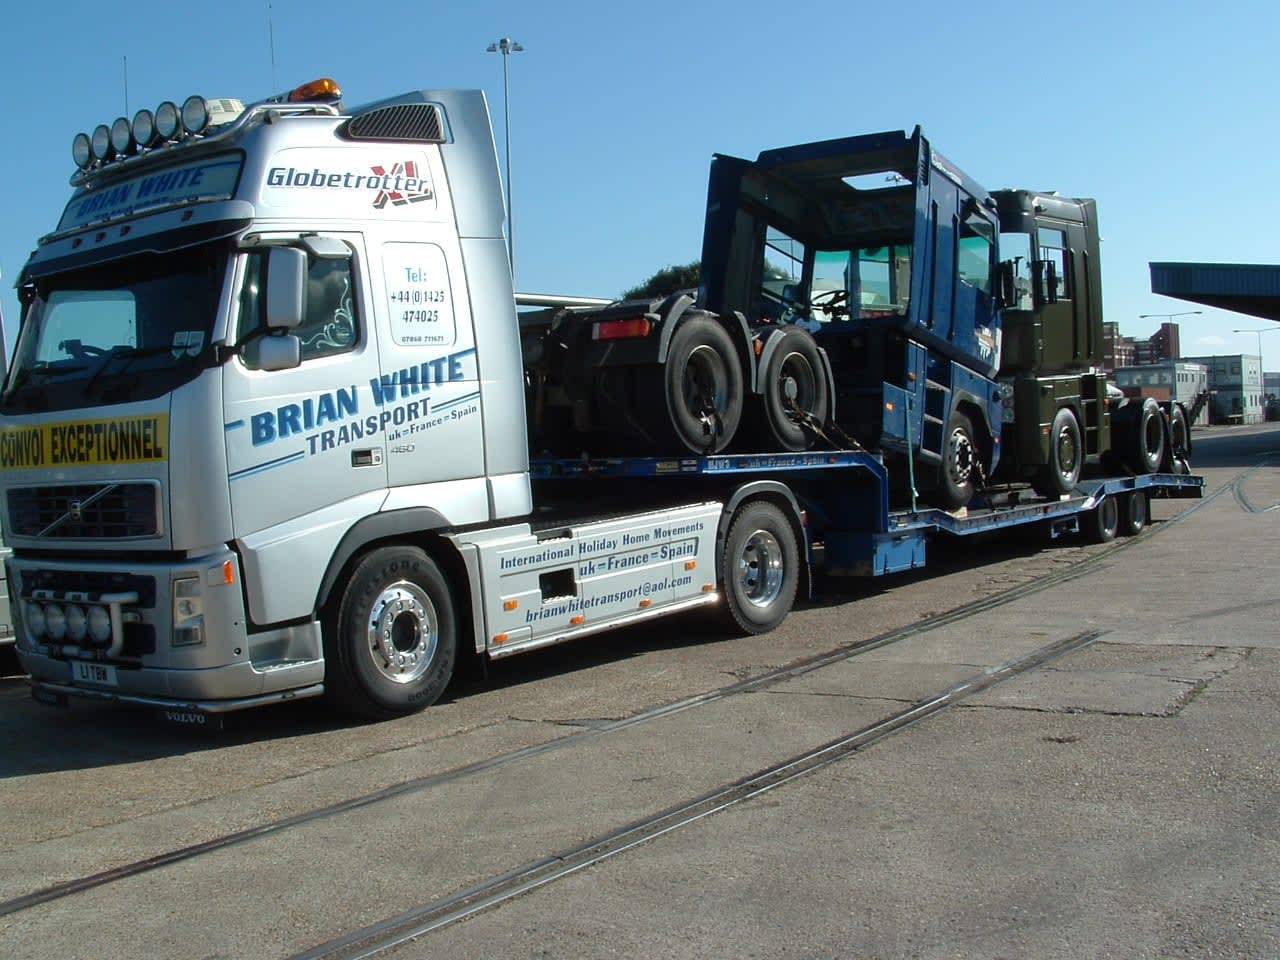 Images Brian White Transport